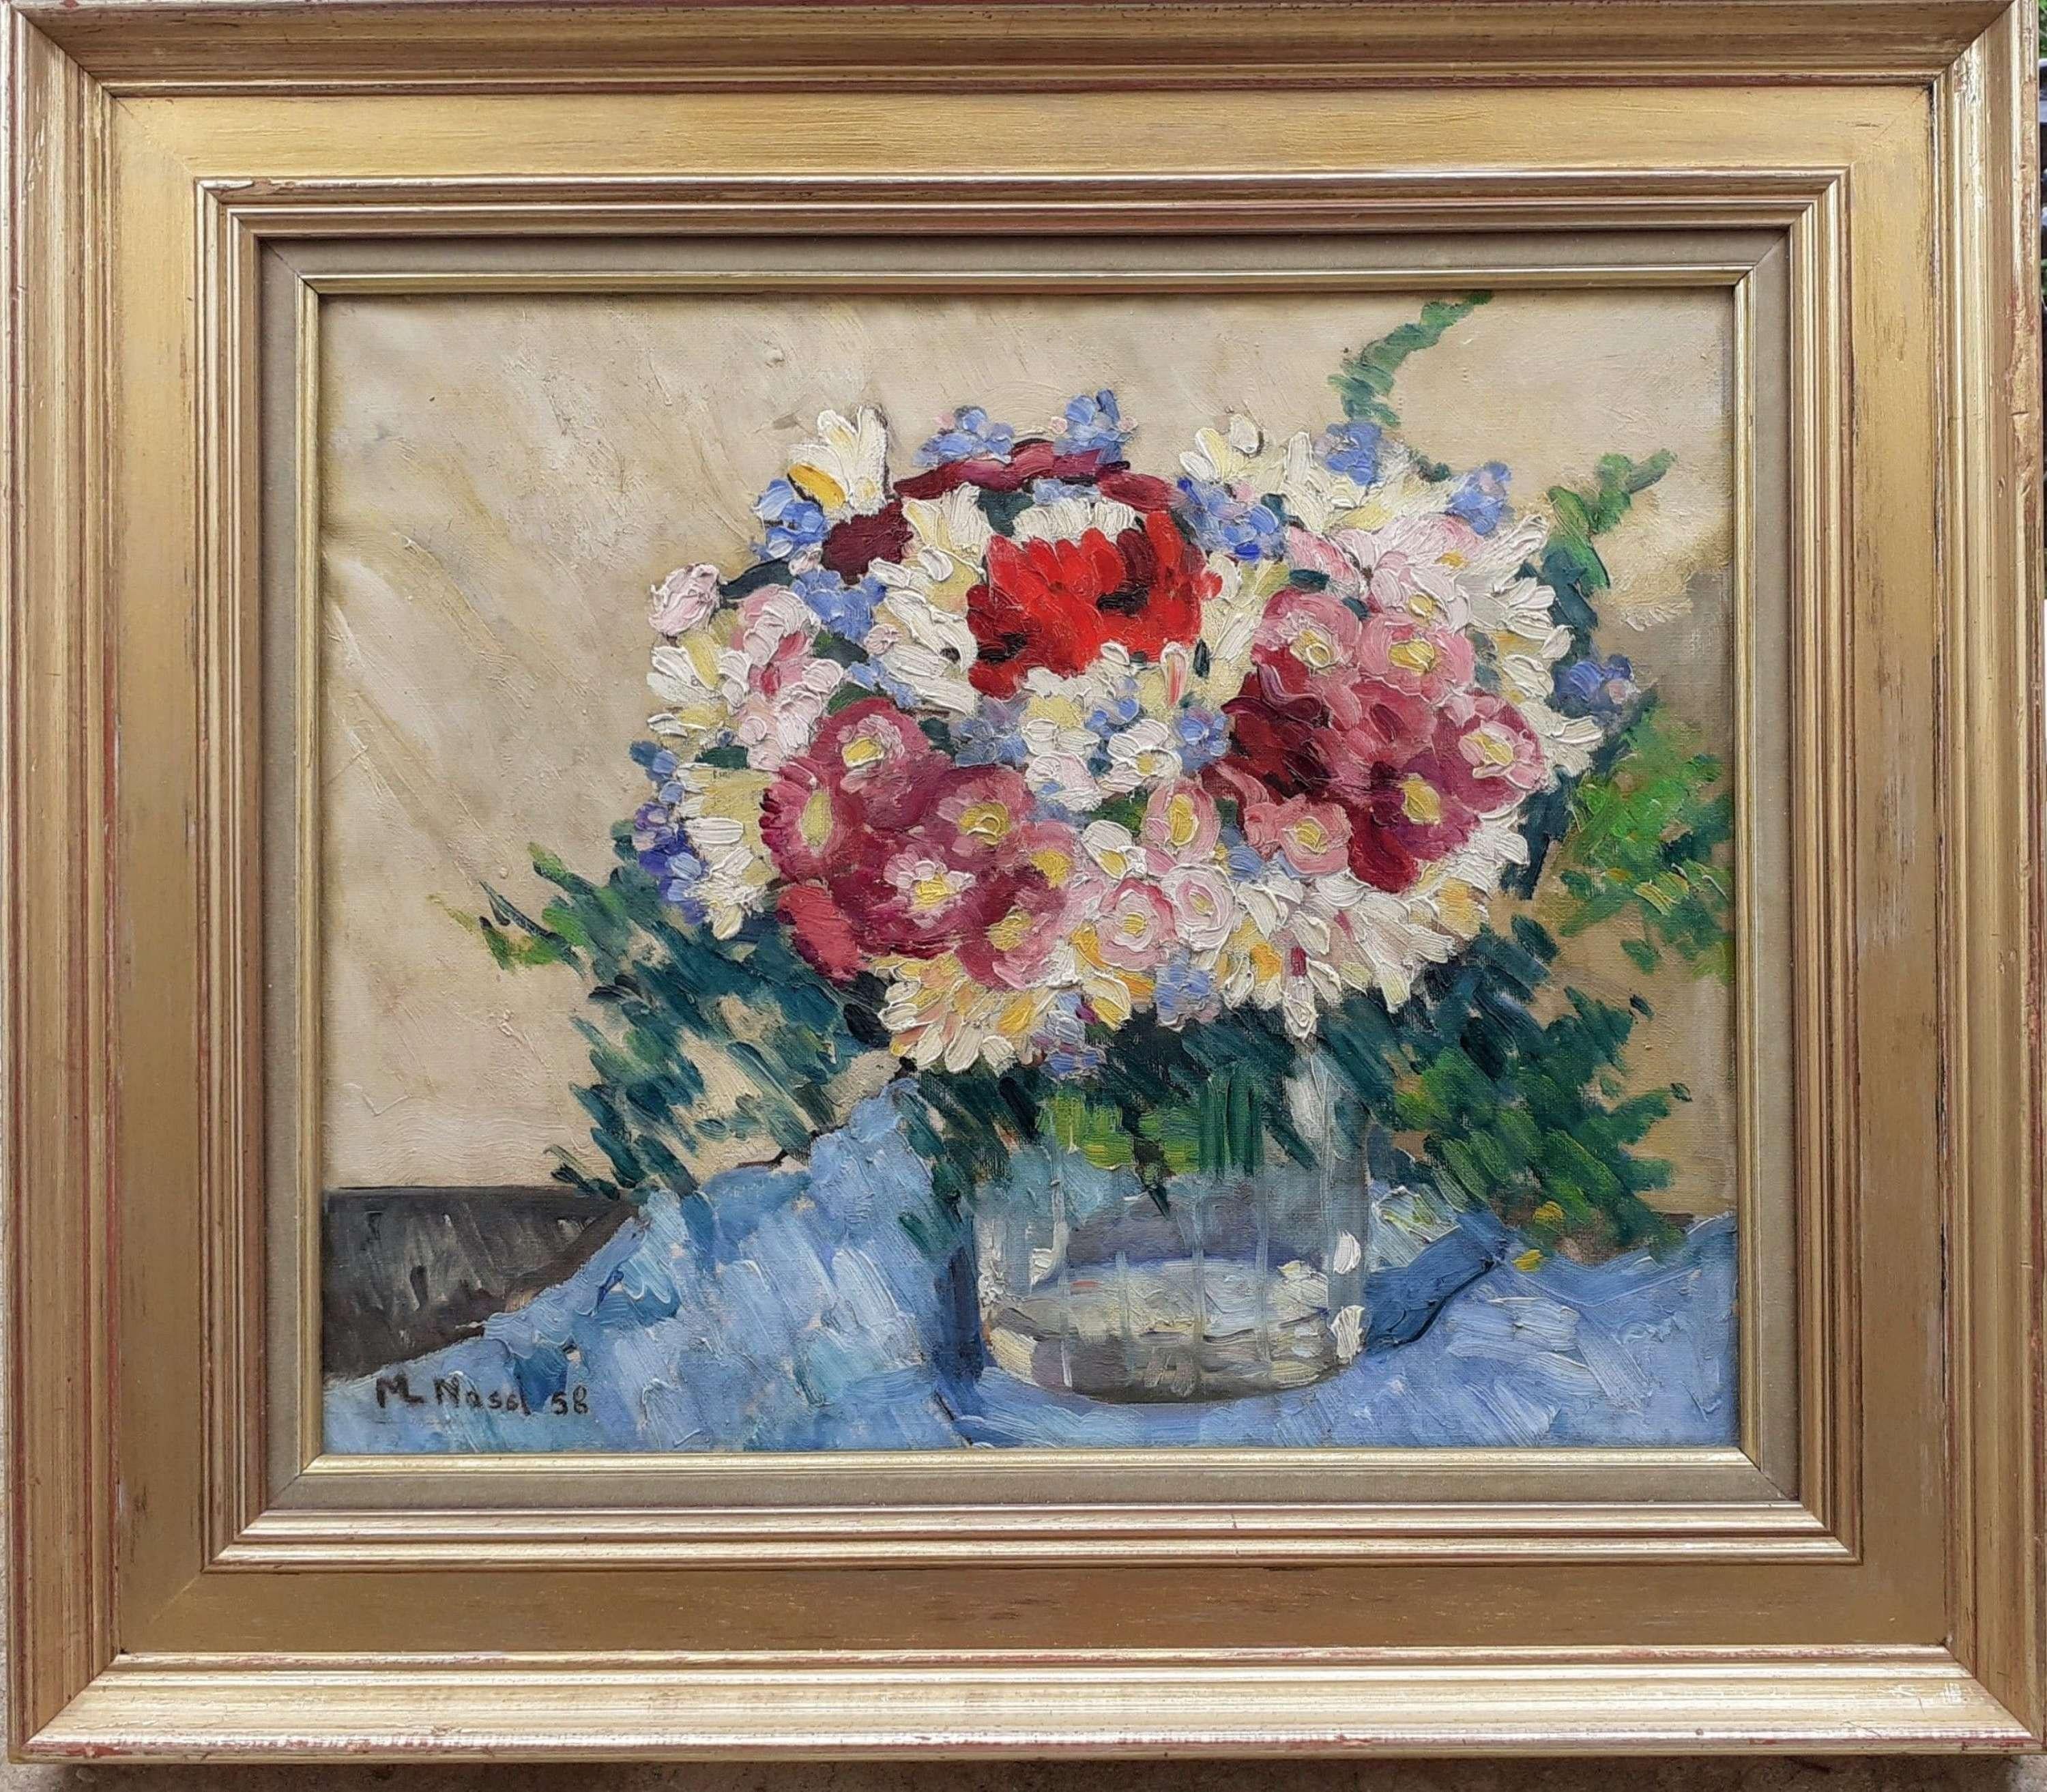 Spring Flowers post impressionist floral still life oil by woman artist painting - Post-Impressionist Painting by marie lucie NESSI